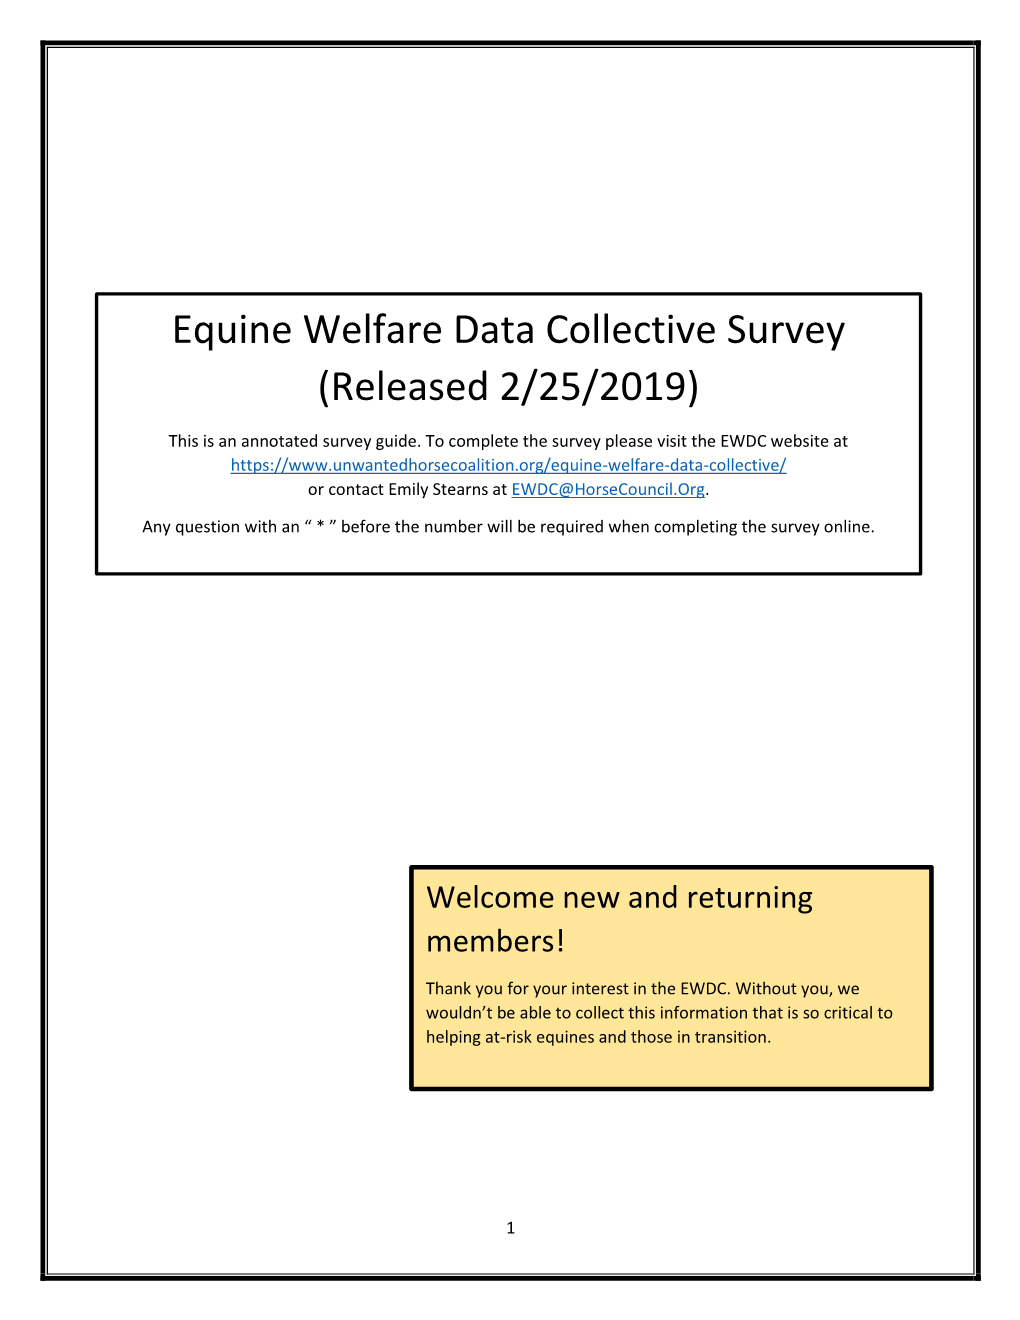 Equine Welfare Data Collective Survey (Released 2/25/2019)